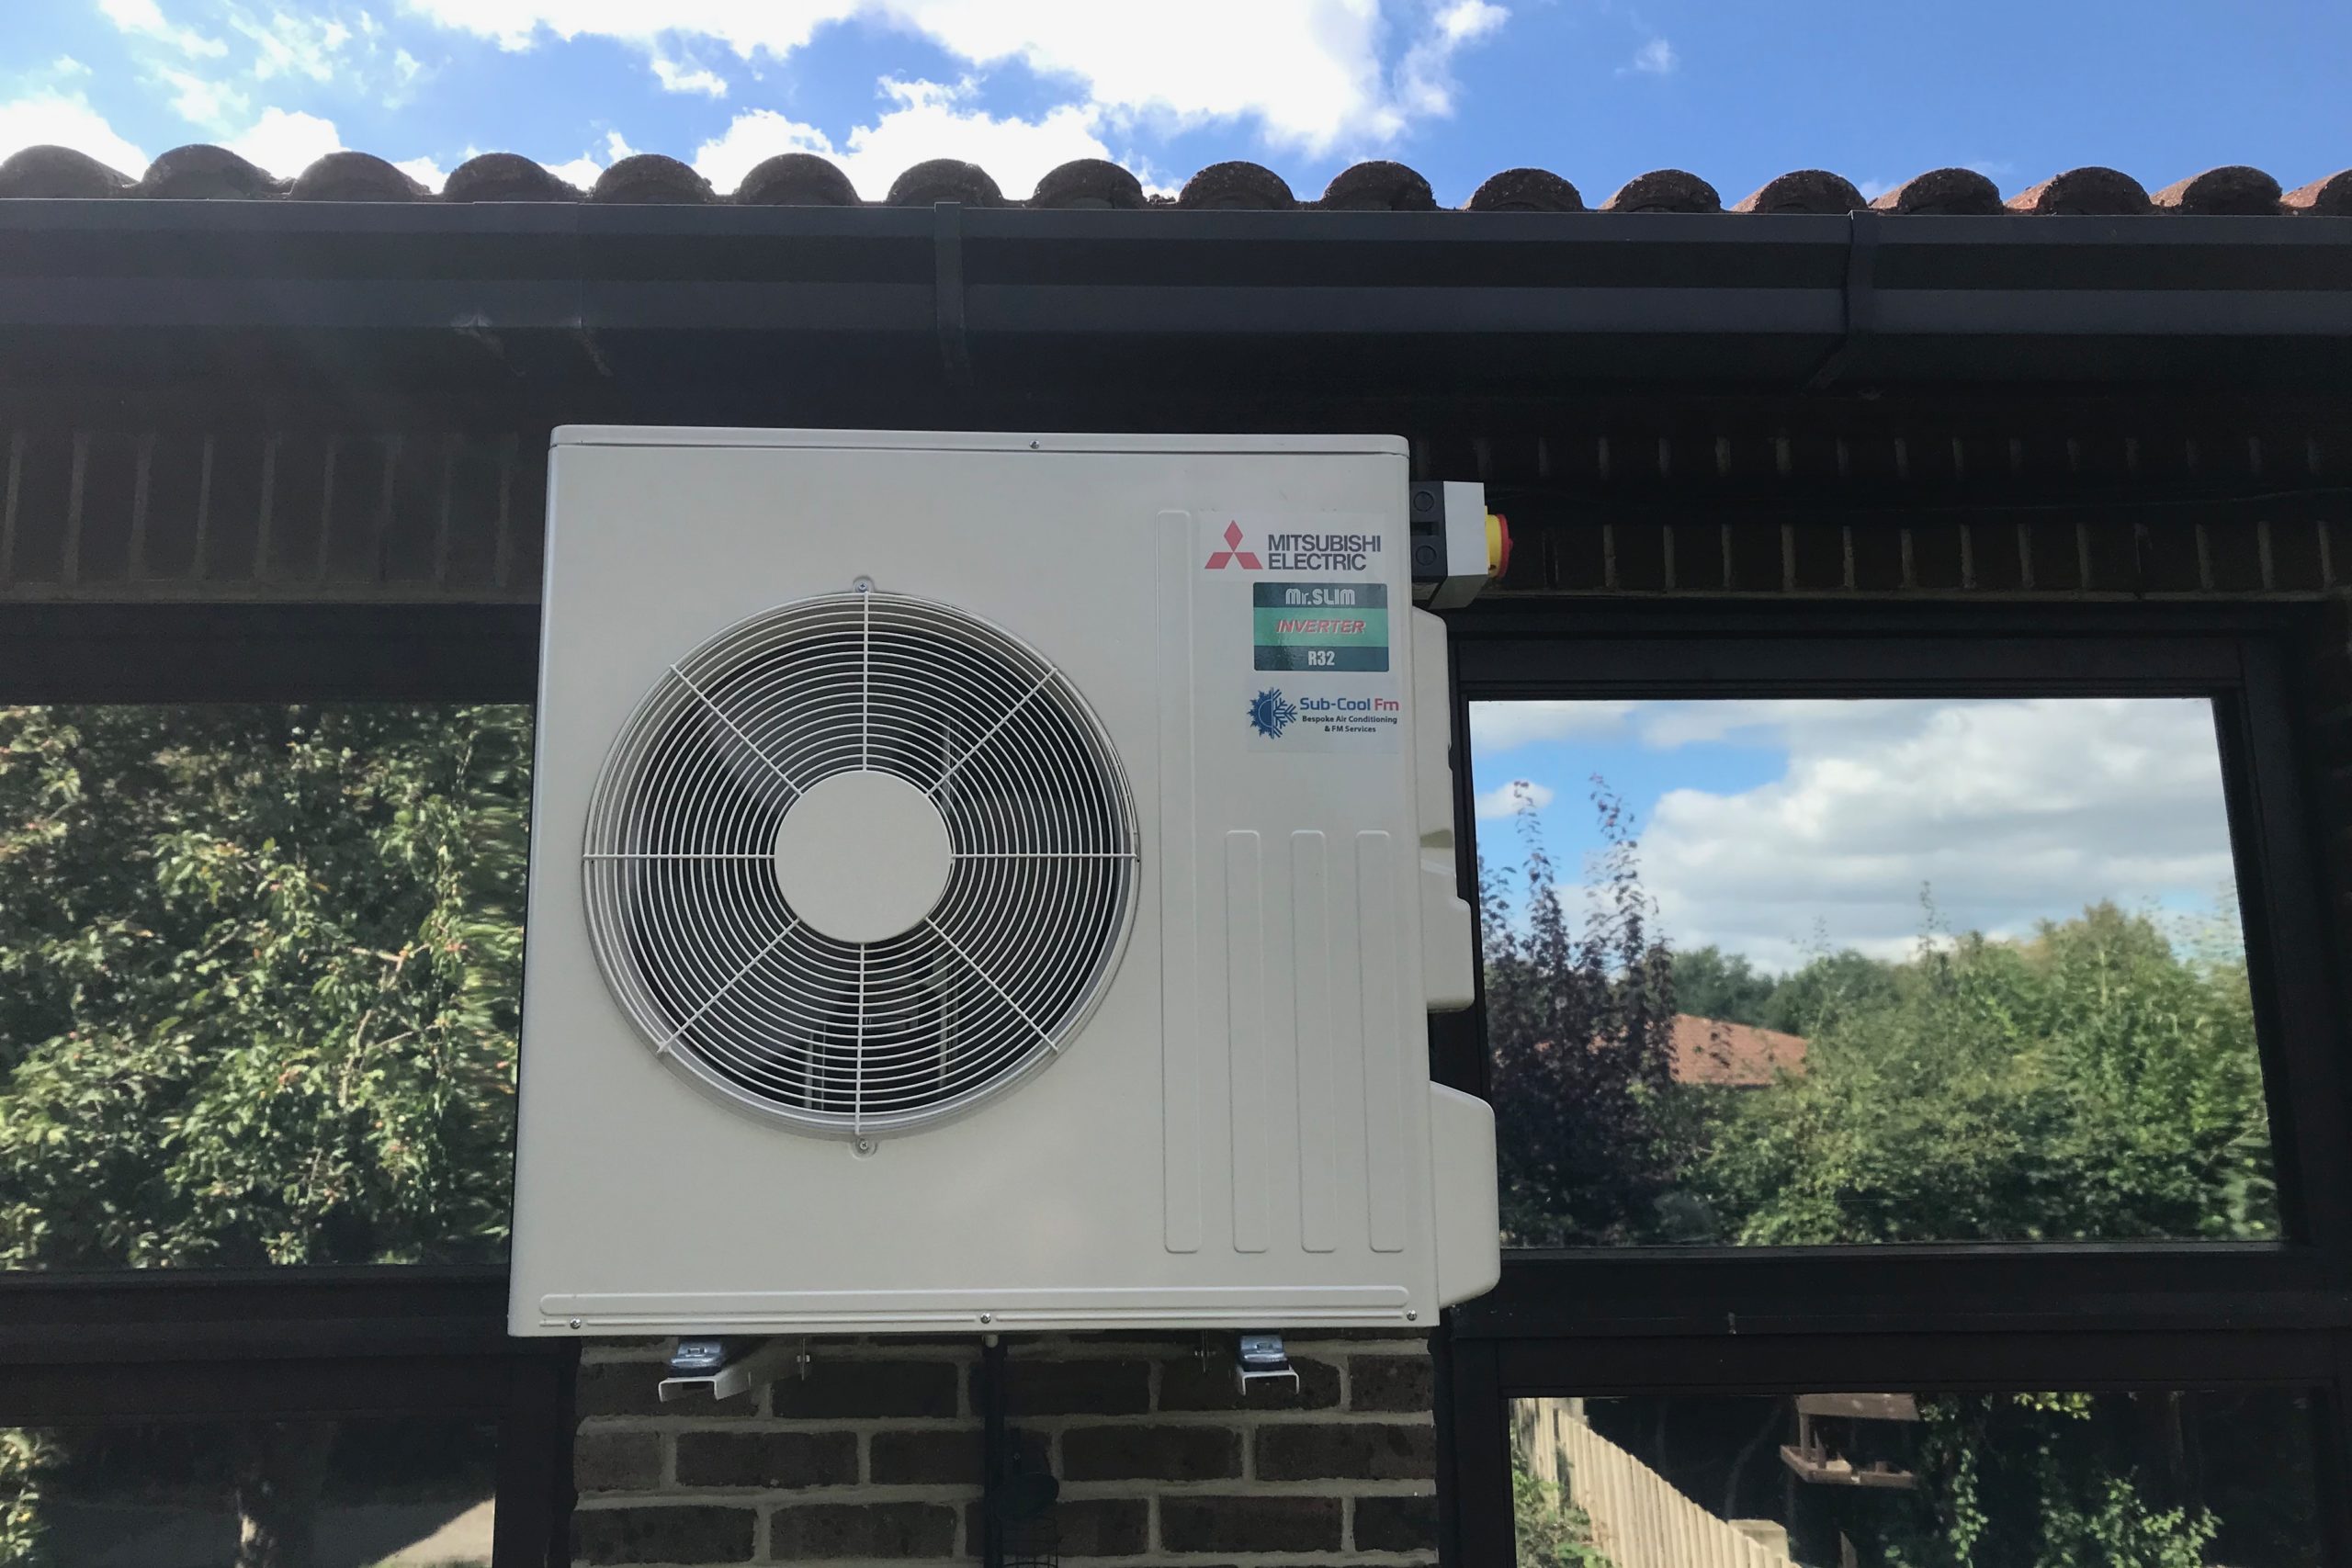 External Mitsubishi Electric air conditioning unit at primary school